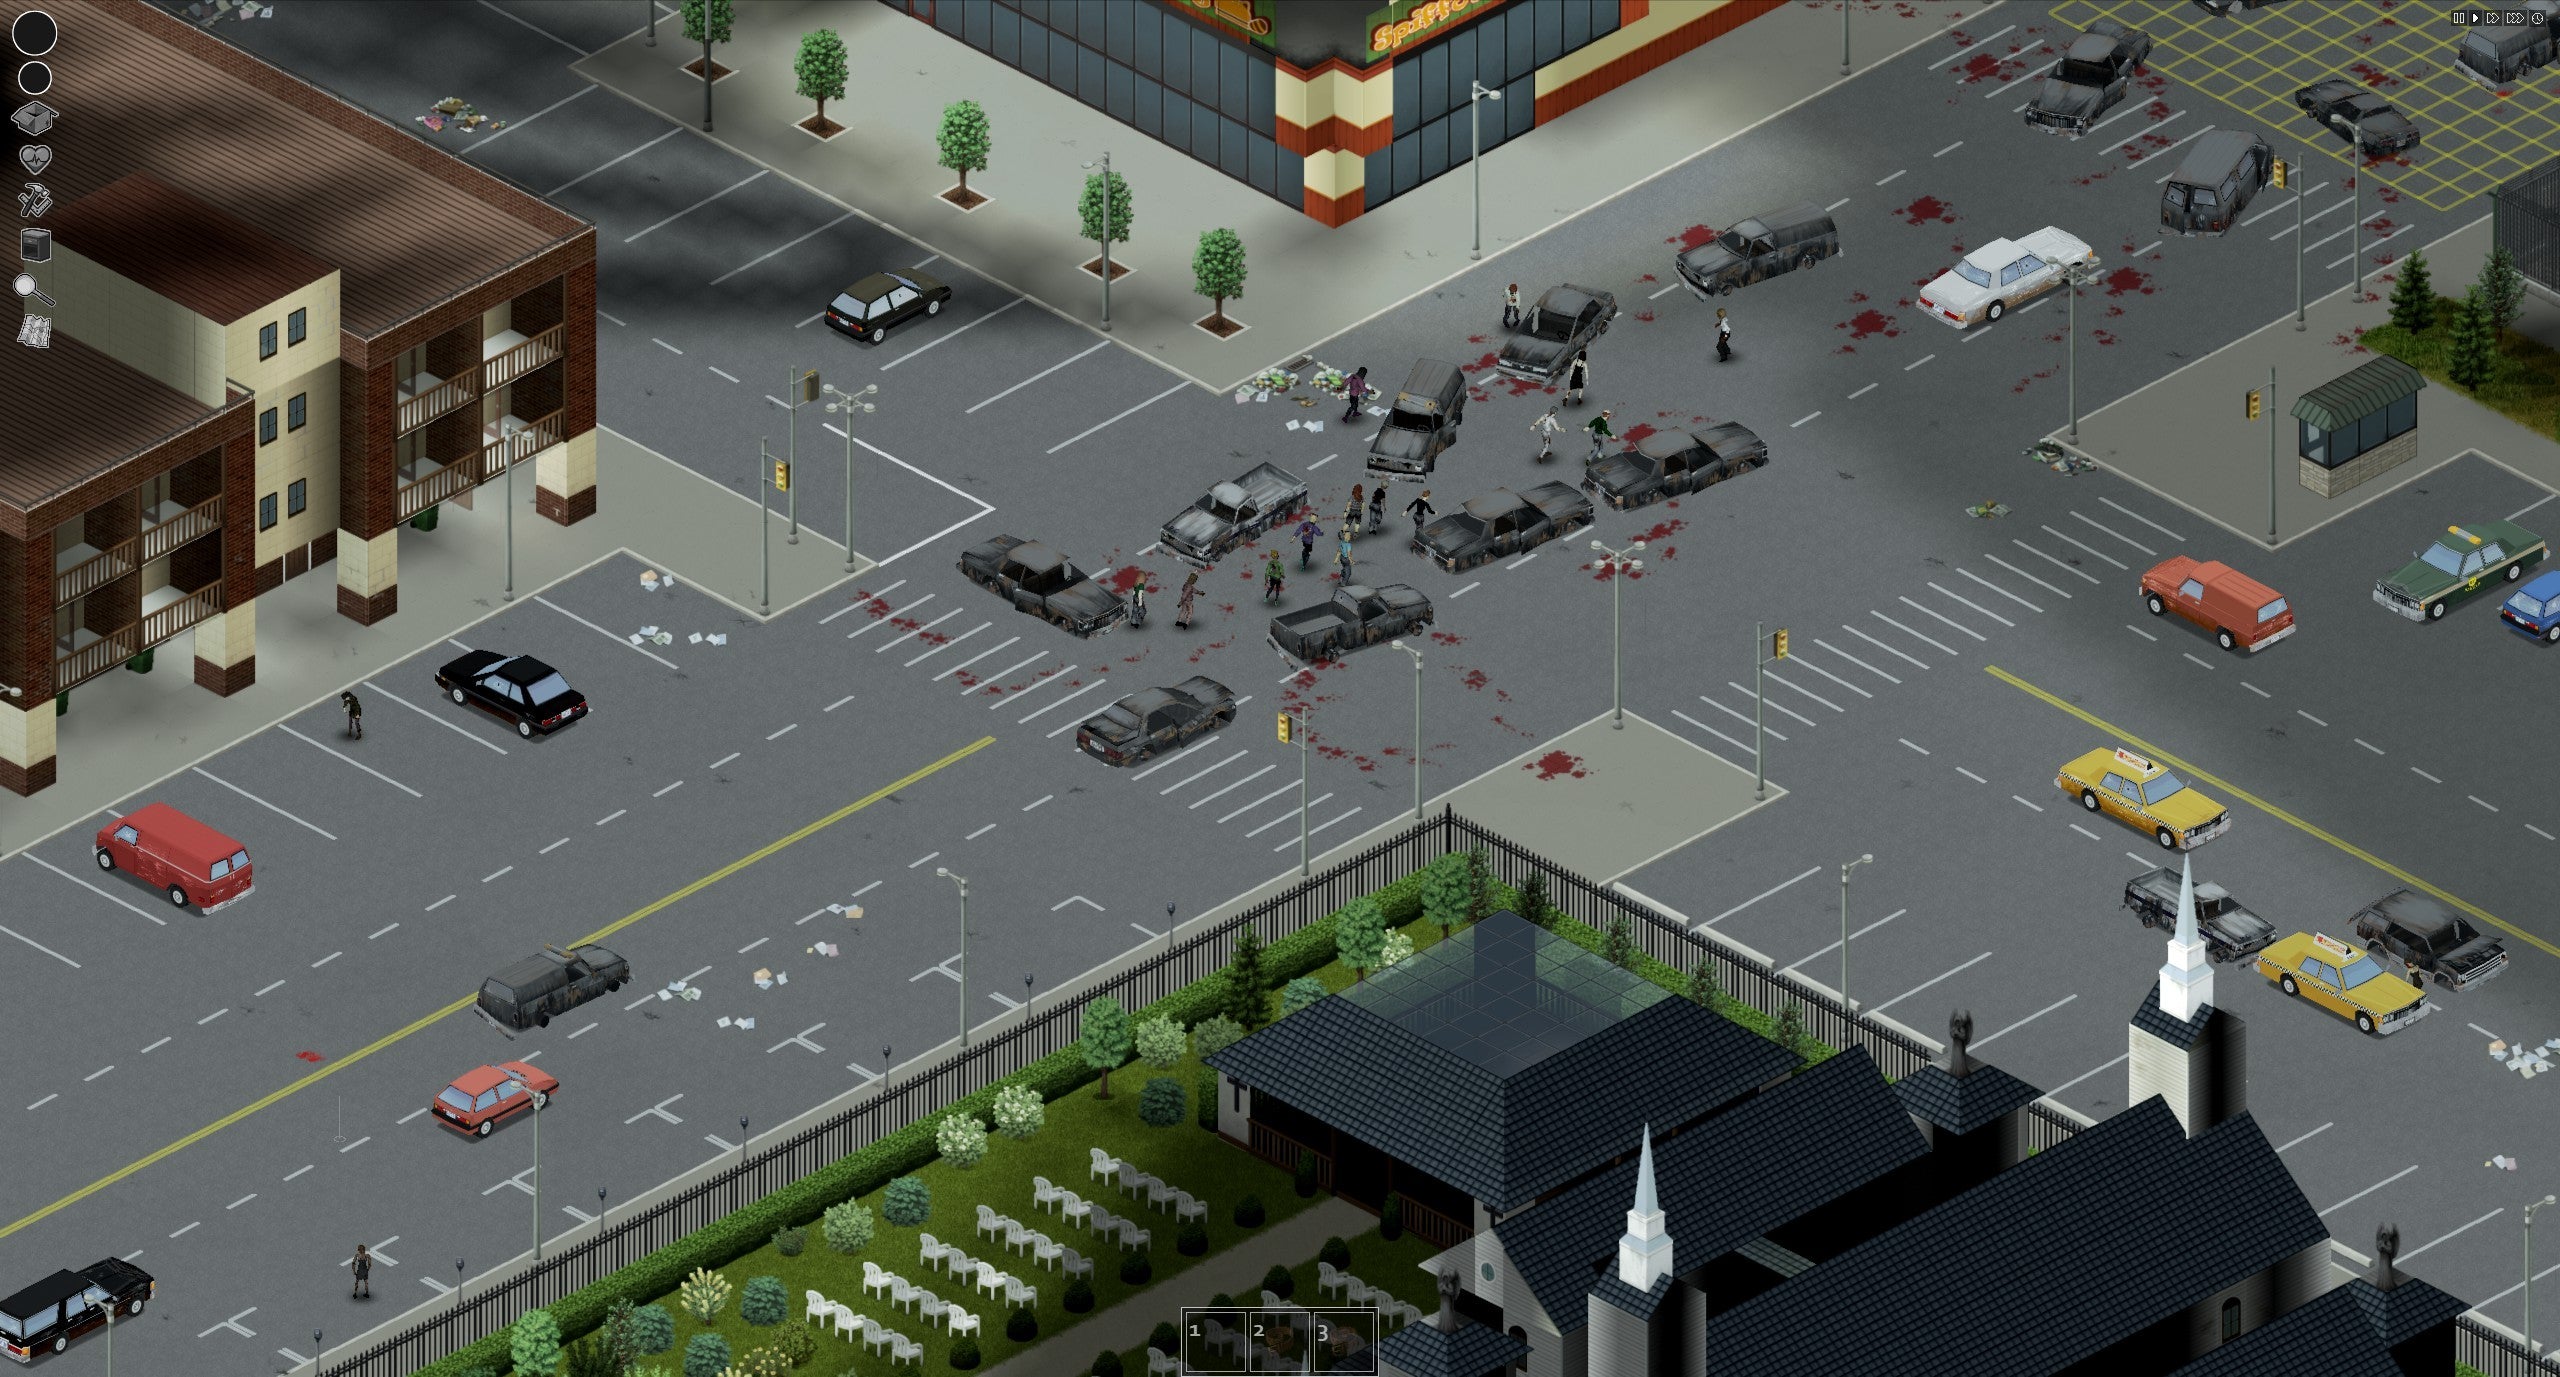 Zombies swarm a bloody intersection in the Raven mod in Project Zomboid